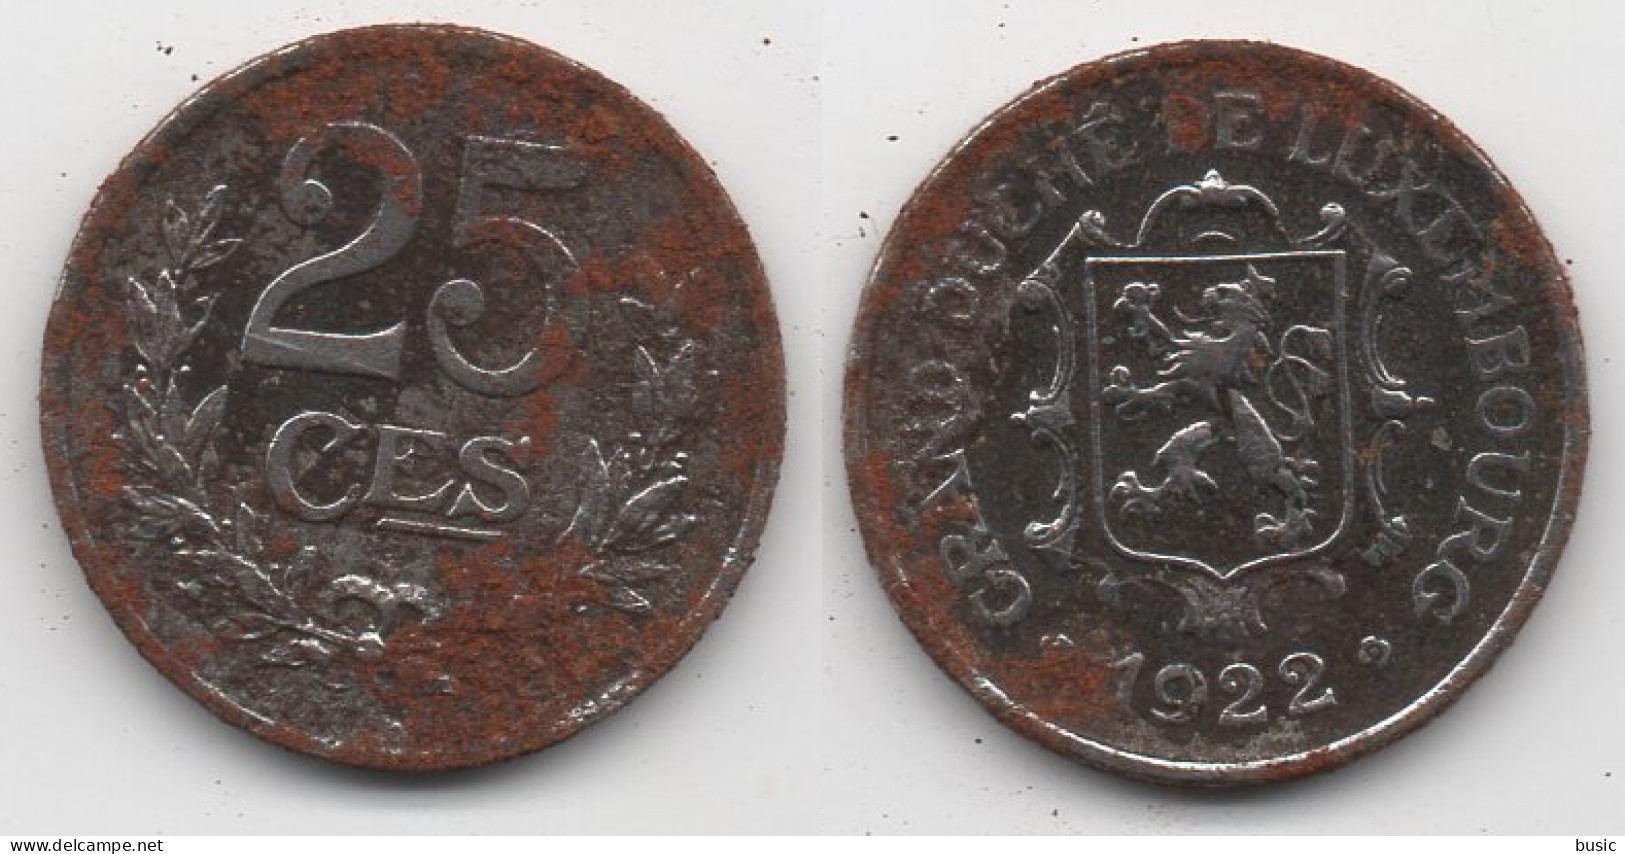 + LUXEMBOURG + 25 CENTIMES 1922 + - Luxembourg